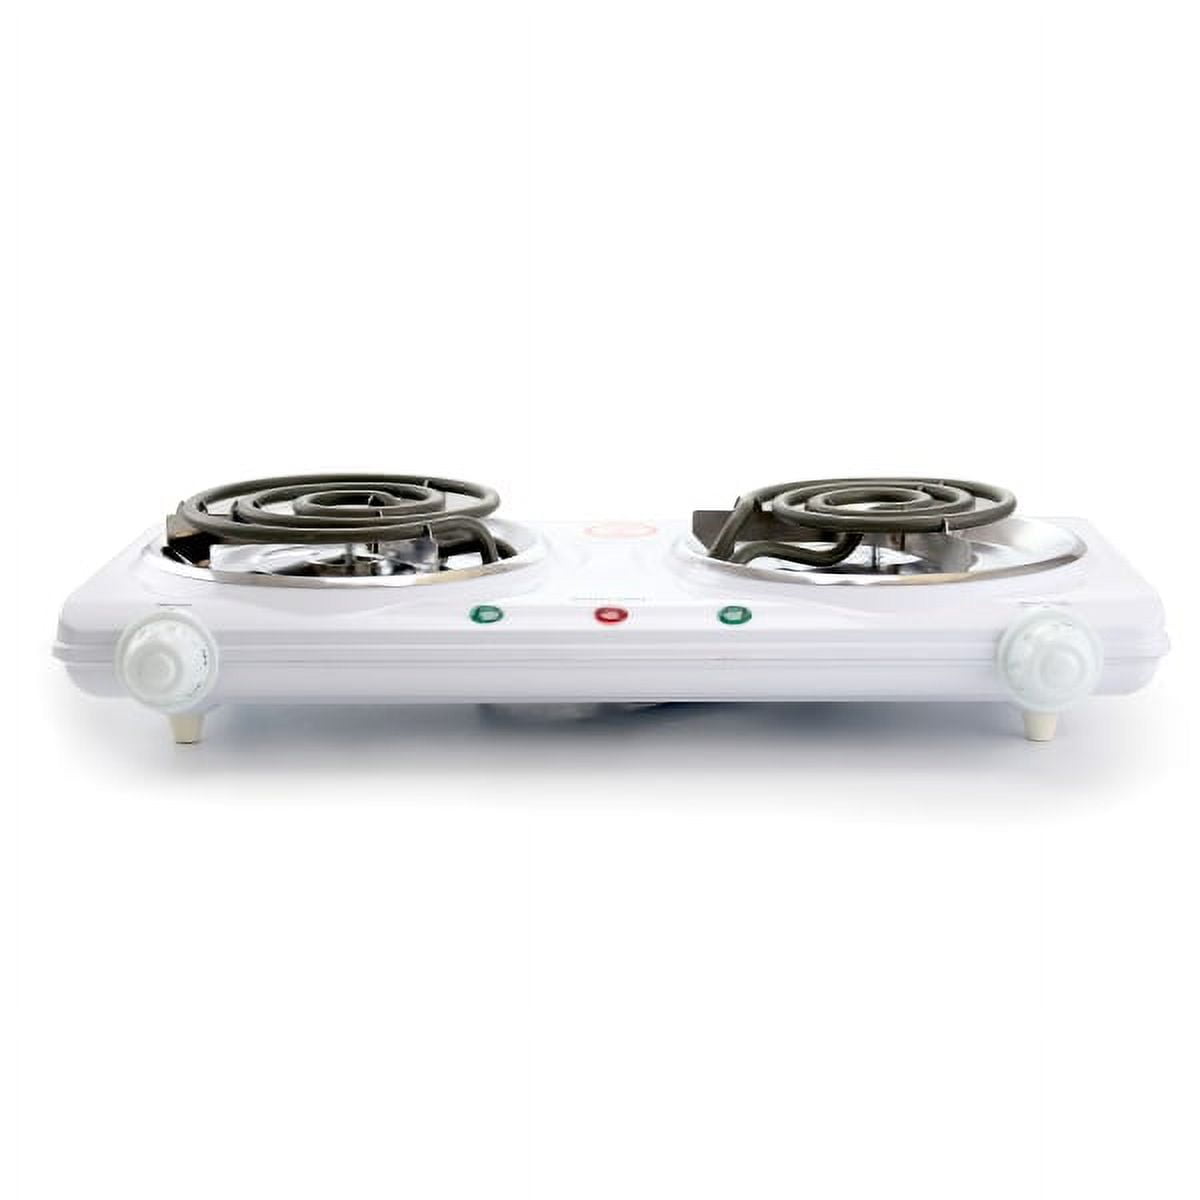 Better Chef Top Dual Buffet Burner Table